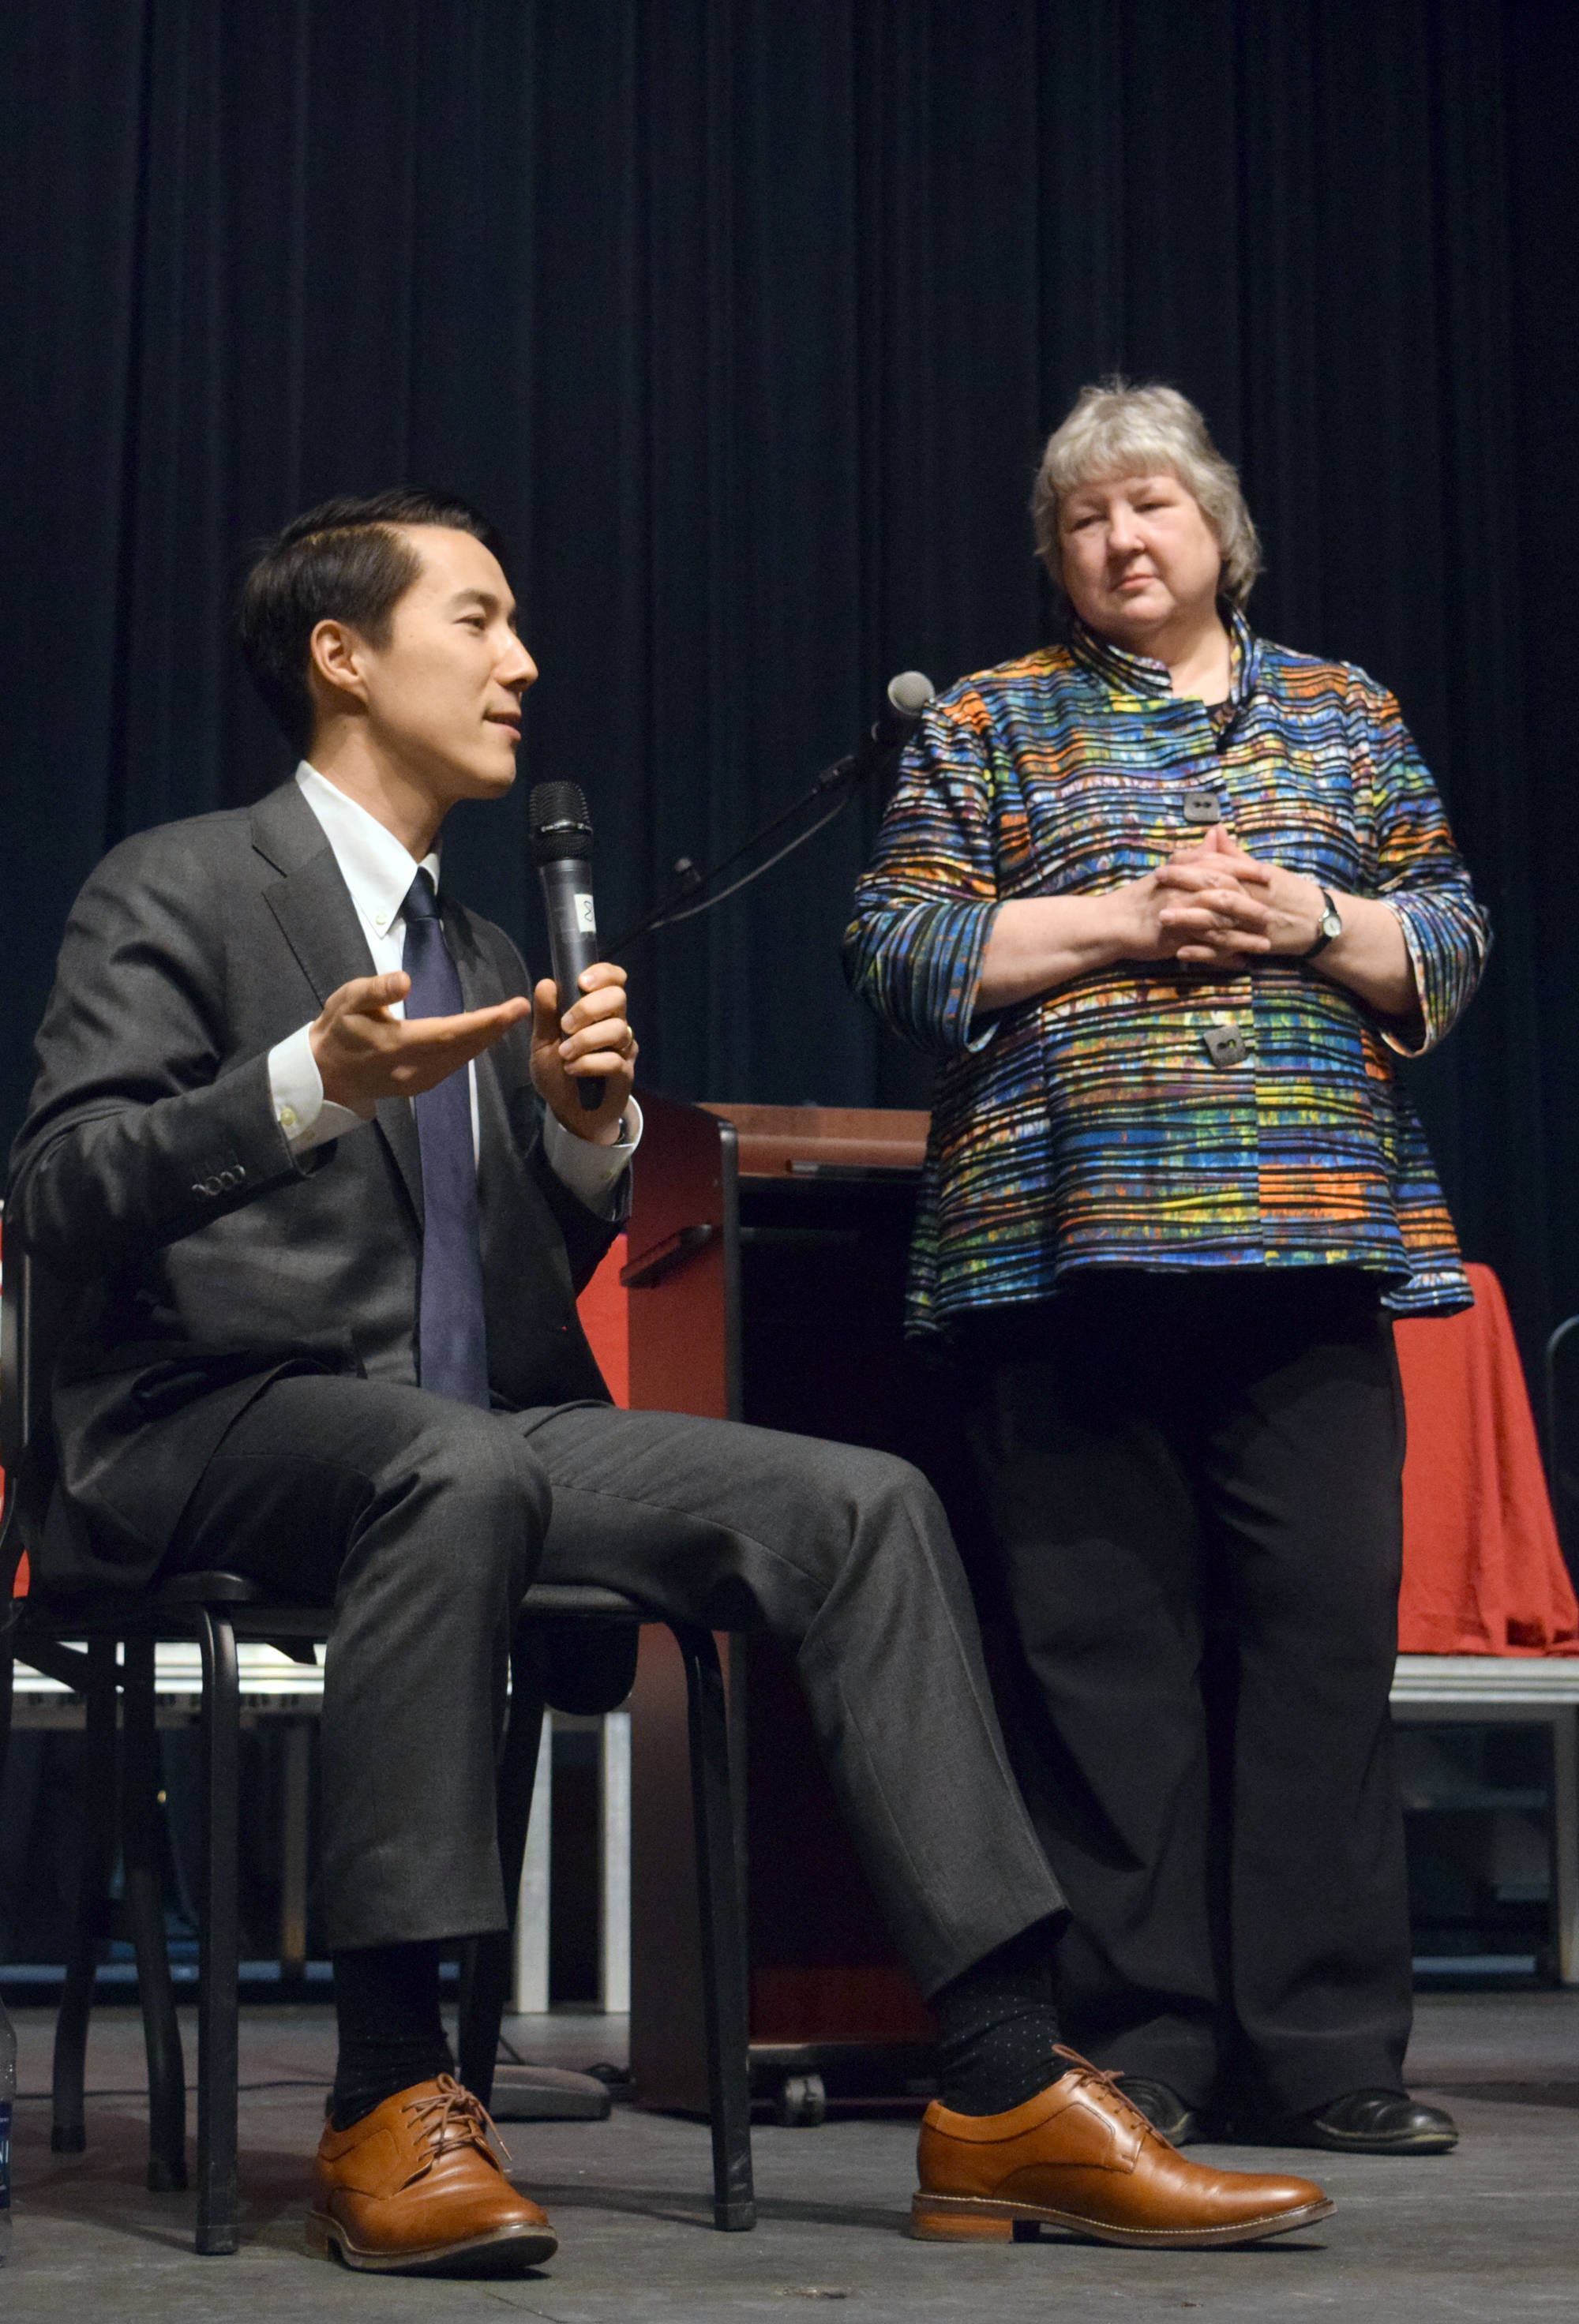 Attorney Jon Choate, left, representing the Alaska Democratic Part discusses the ins and outs of the case after the oral arguments on Thursday as part of the Supreme Court Live event moderated by Marilyn May, right at Kenai Central High School. (Photo by Kat Sorensen/Peninsula Clarion)